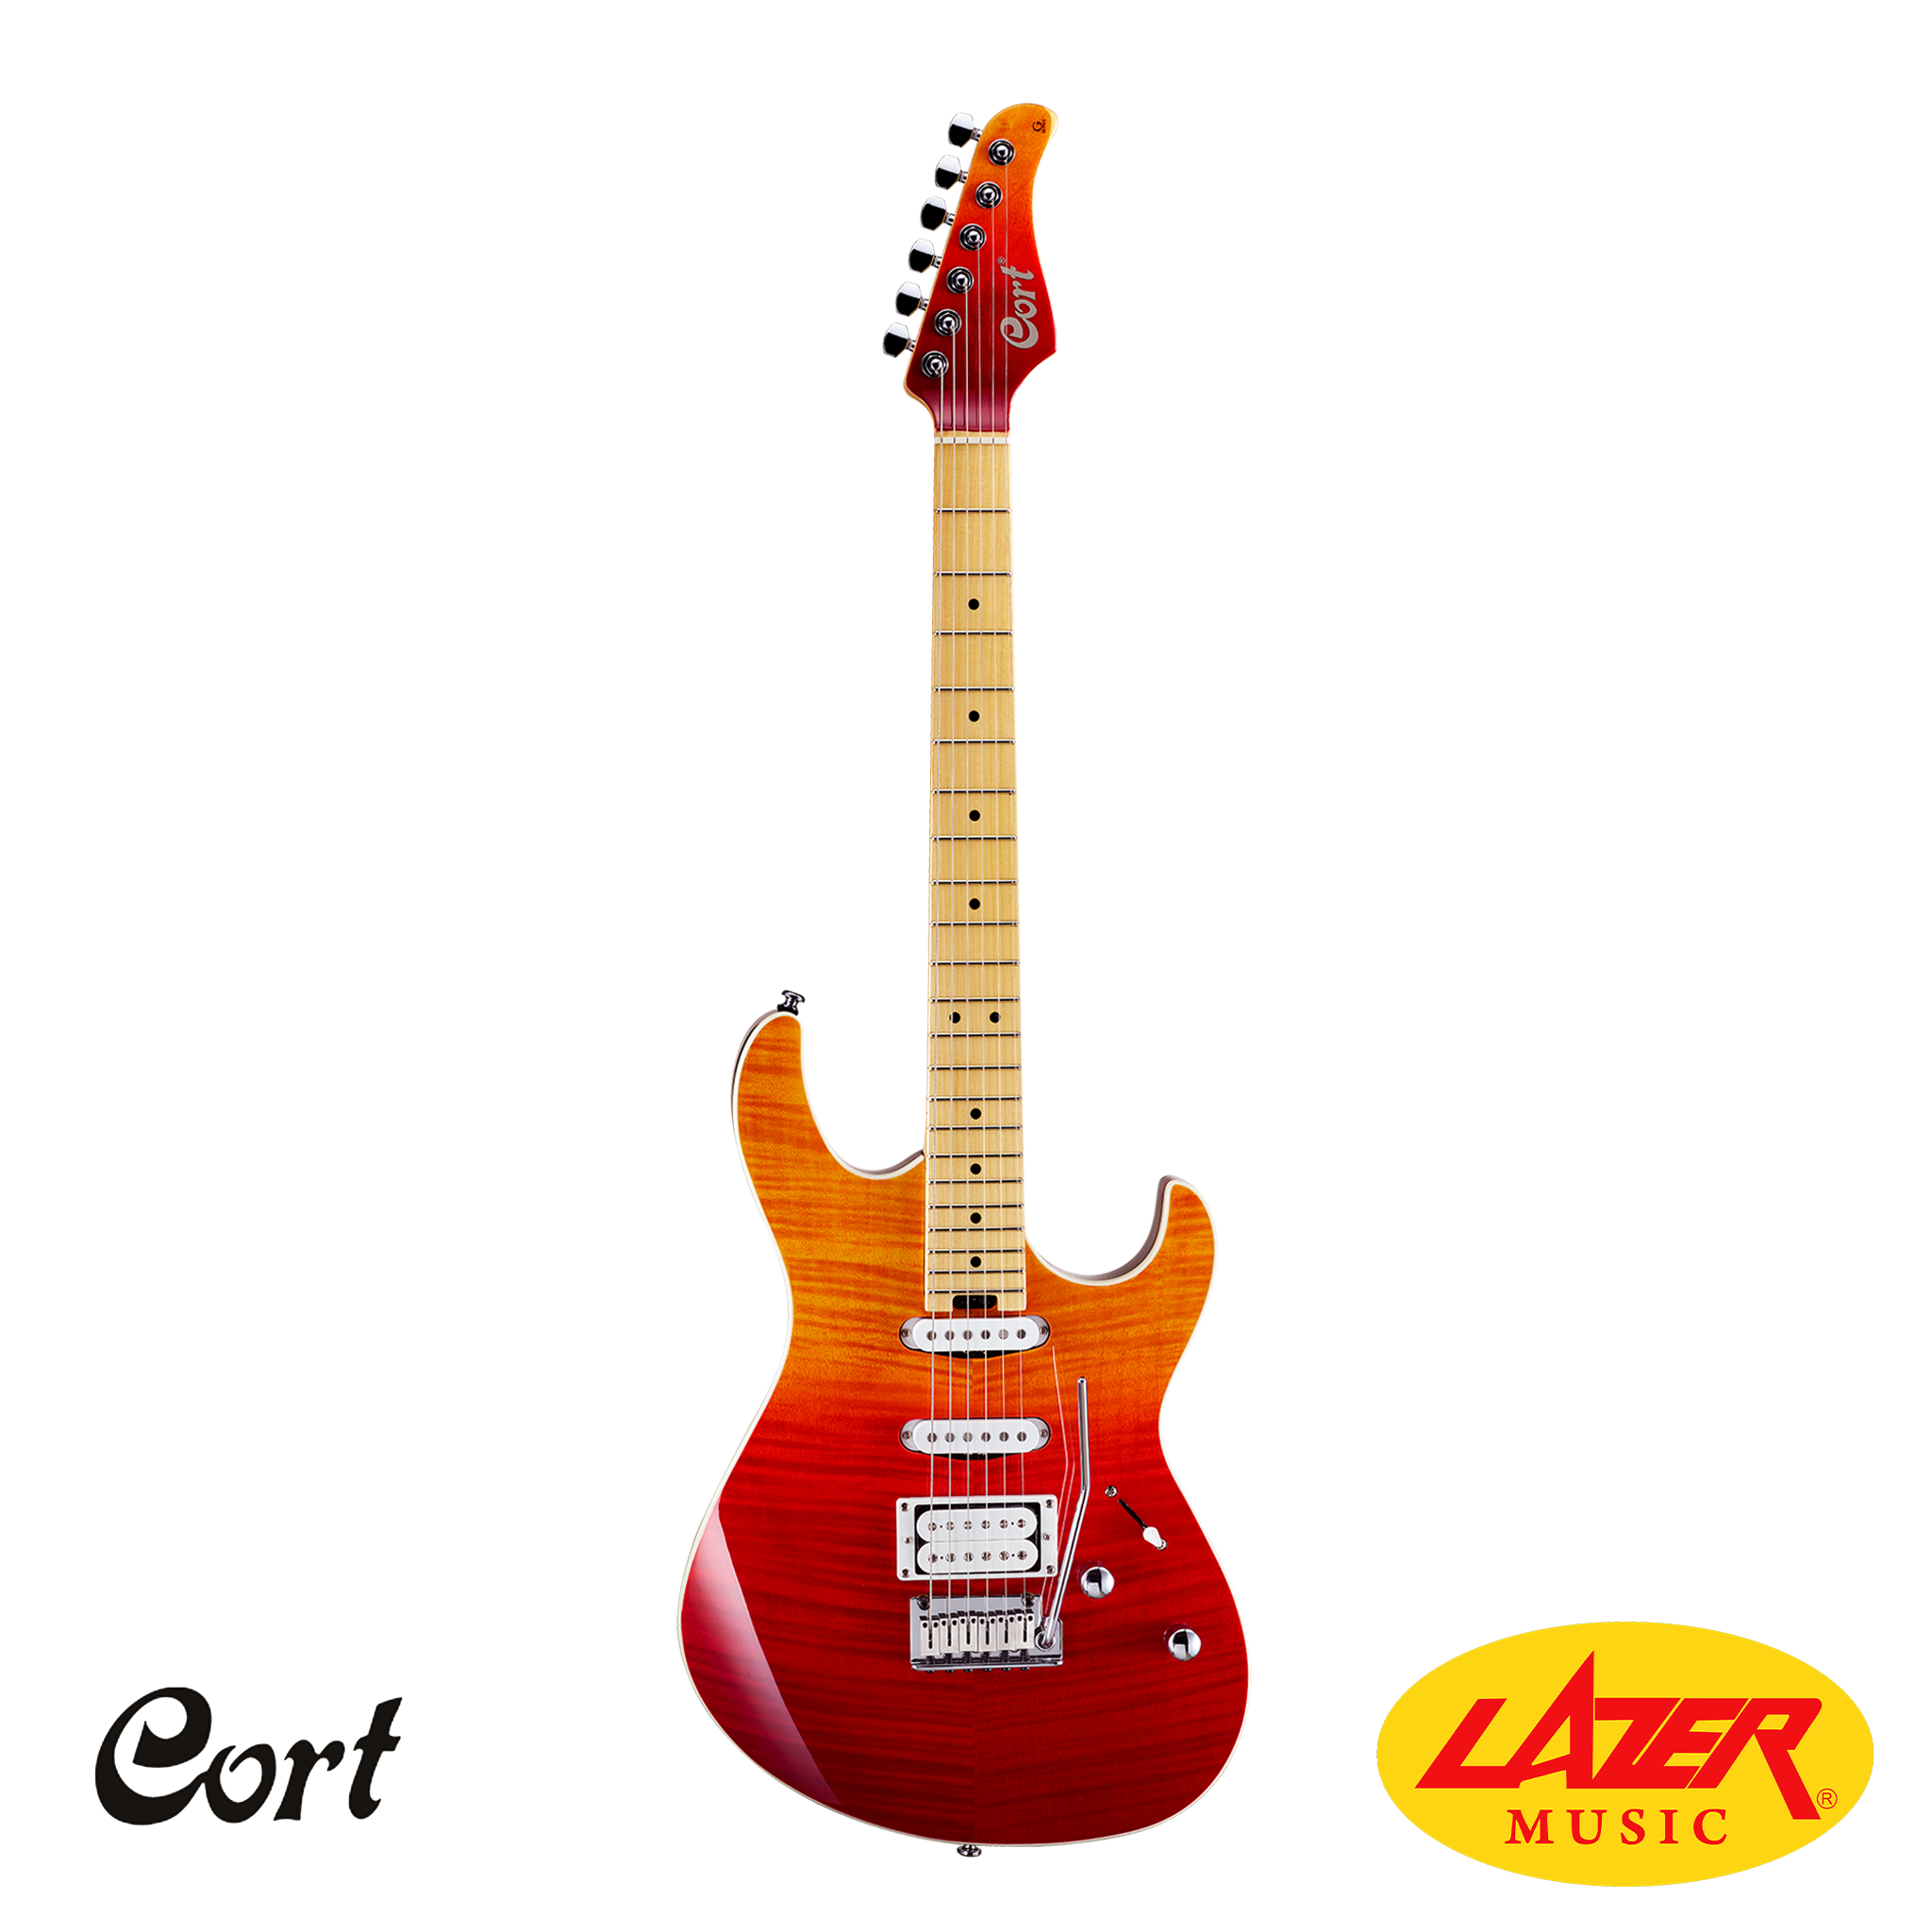 Cort G280DX Alder Body Hard Maple Neck Locking Tuners HSS Electric Guitar With Bag